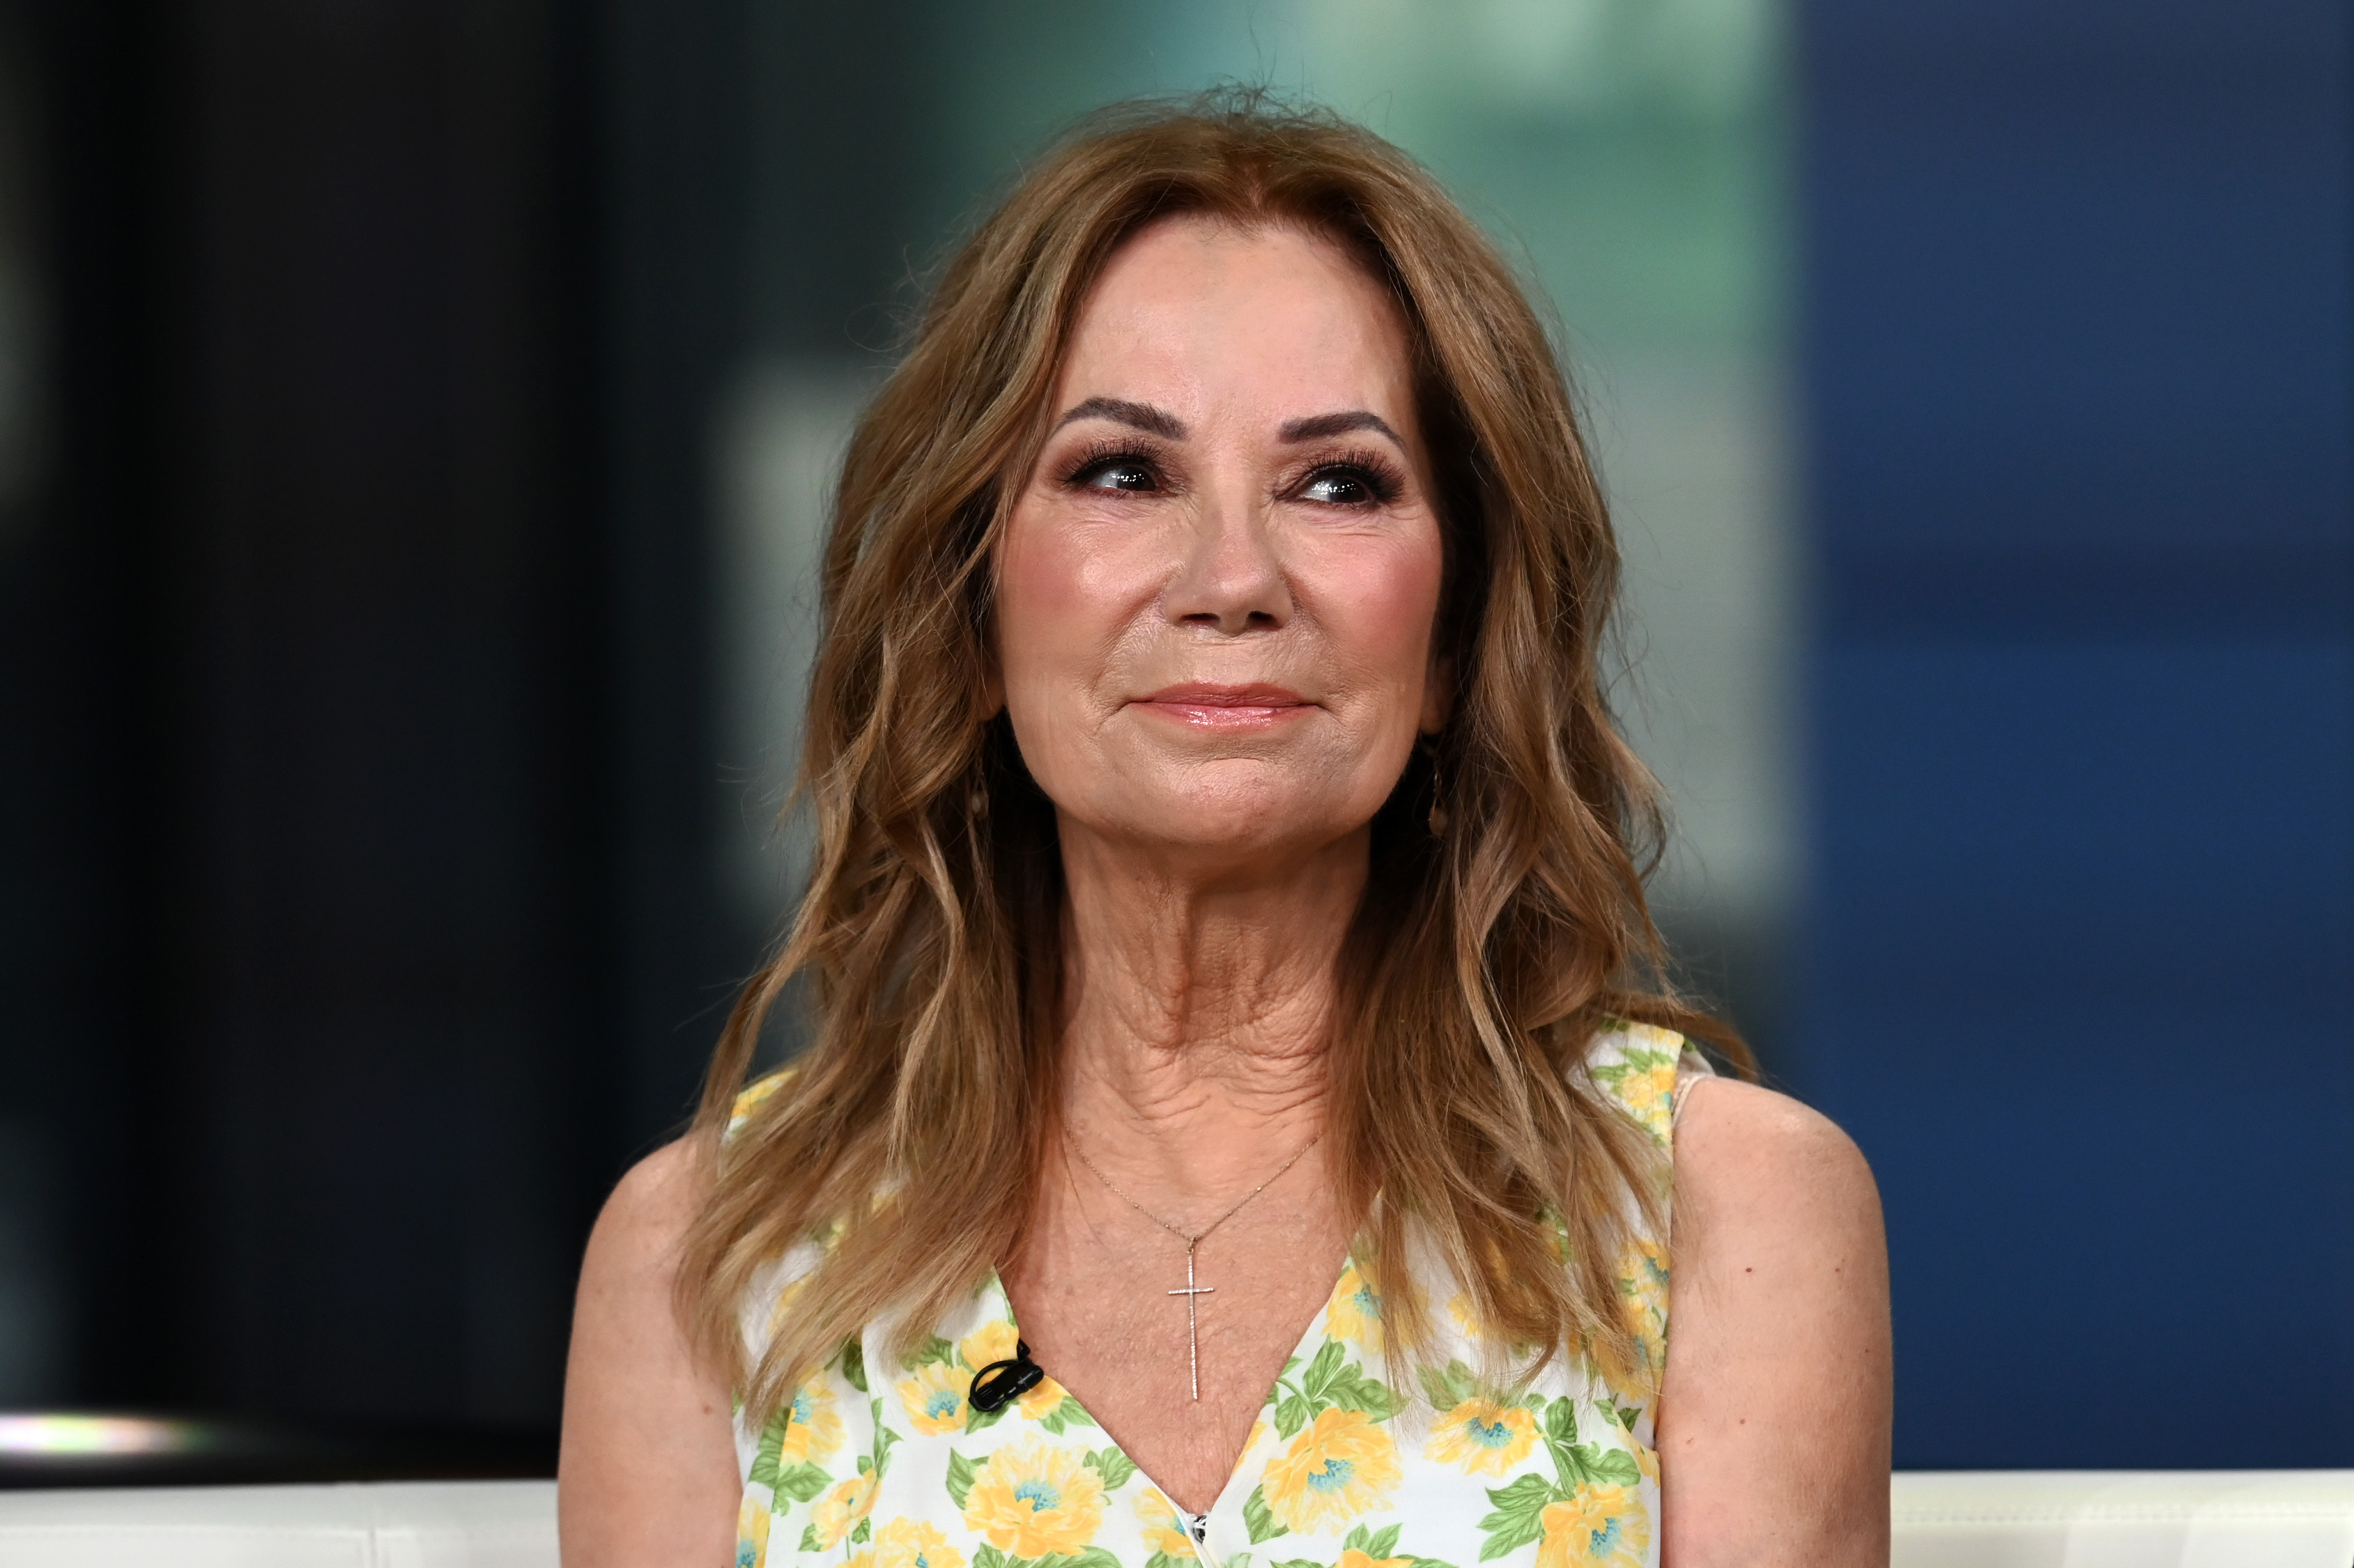 Kathie Lee Gifford visits "FOX & Friends" at Fox News Channel Studios on August 30, 2022 in New York City | Source: Getty Images